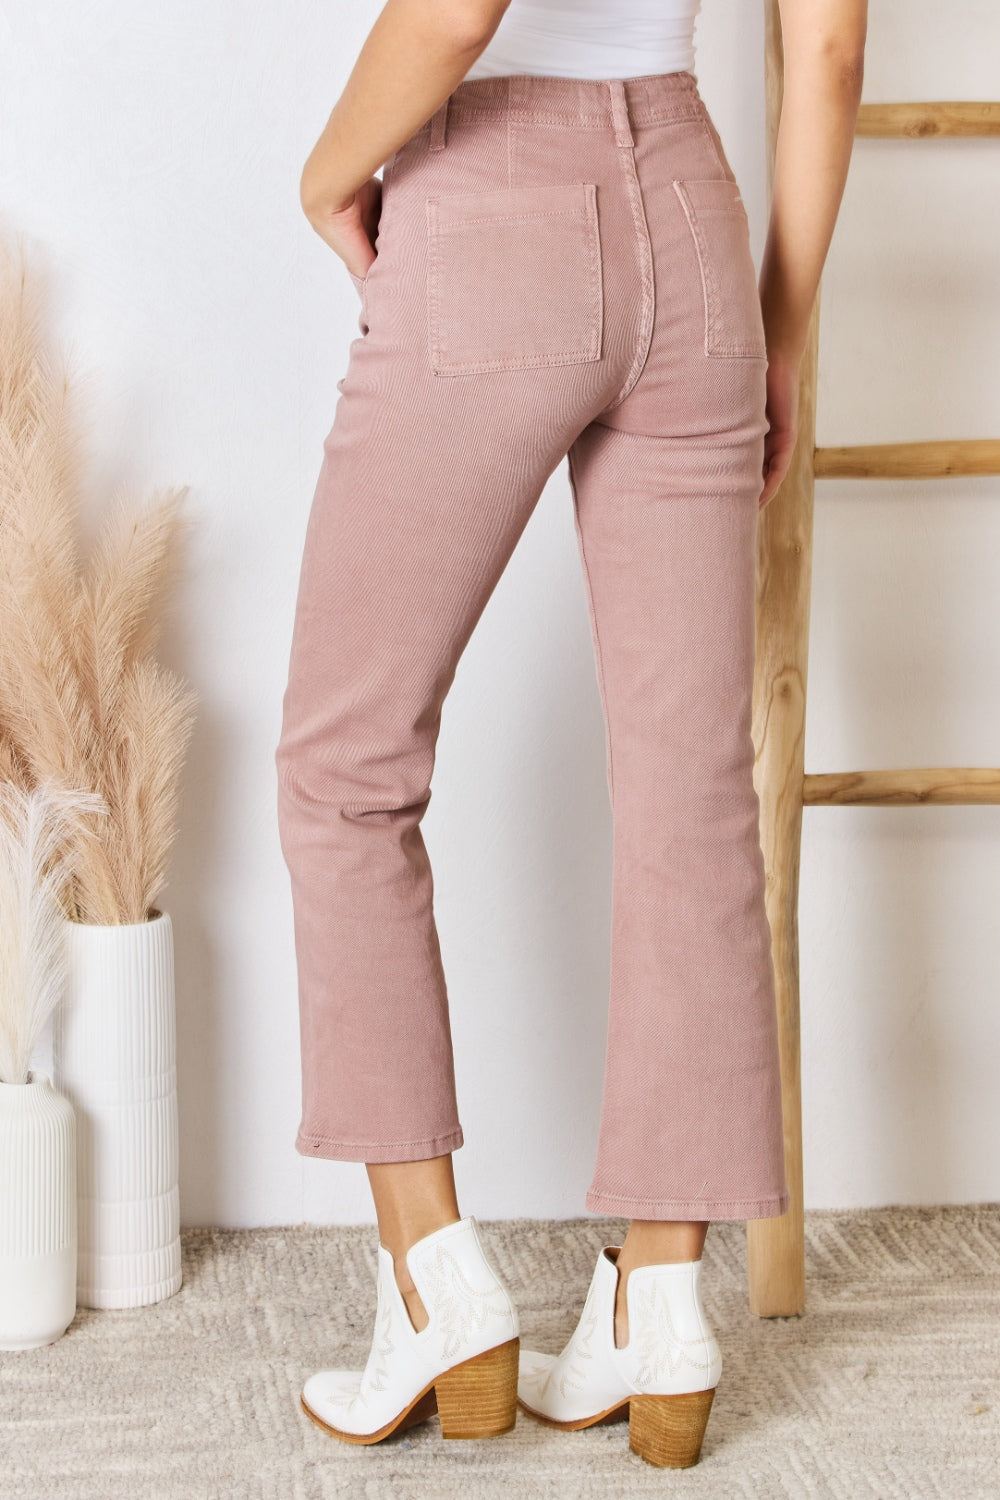 RISEN Jeans - High Rise Ankle Flare - Pink - Inspired Eye Boutique